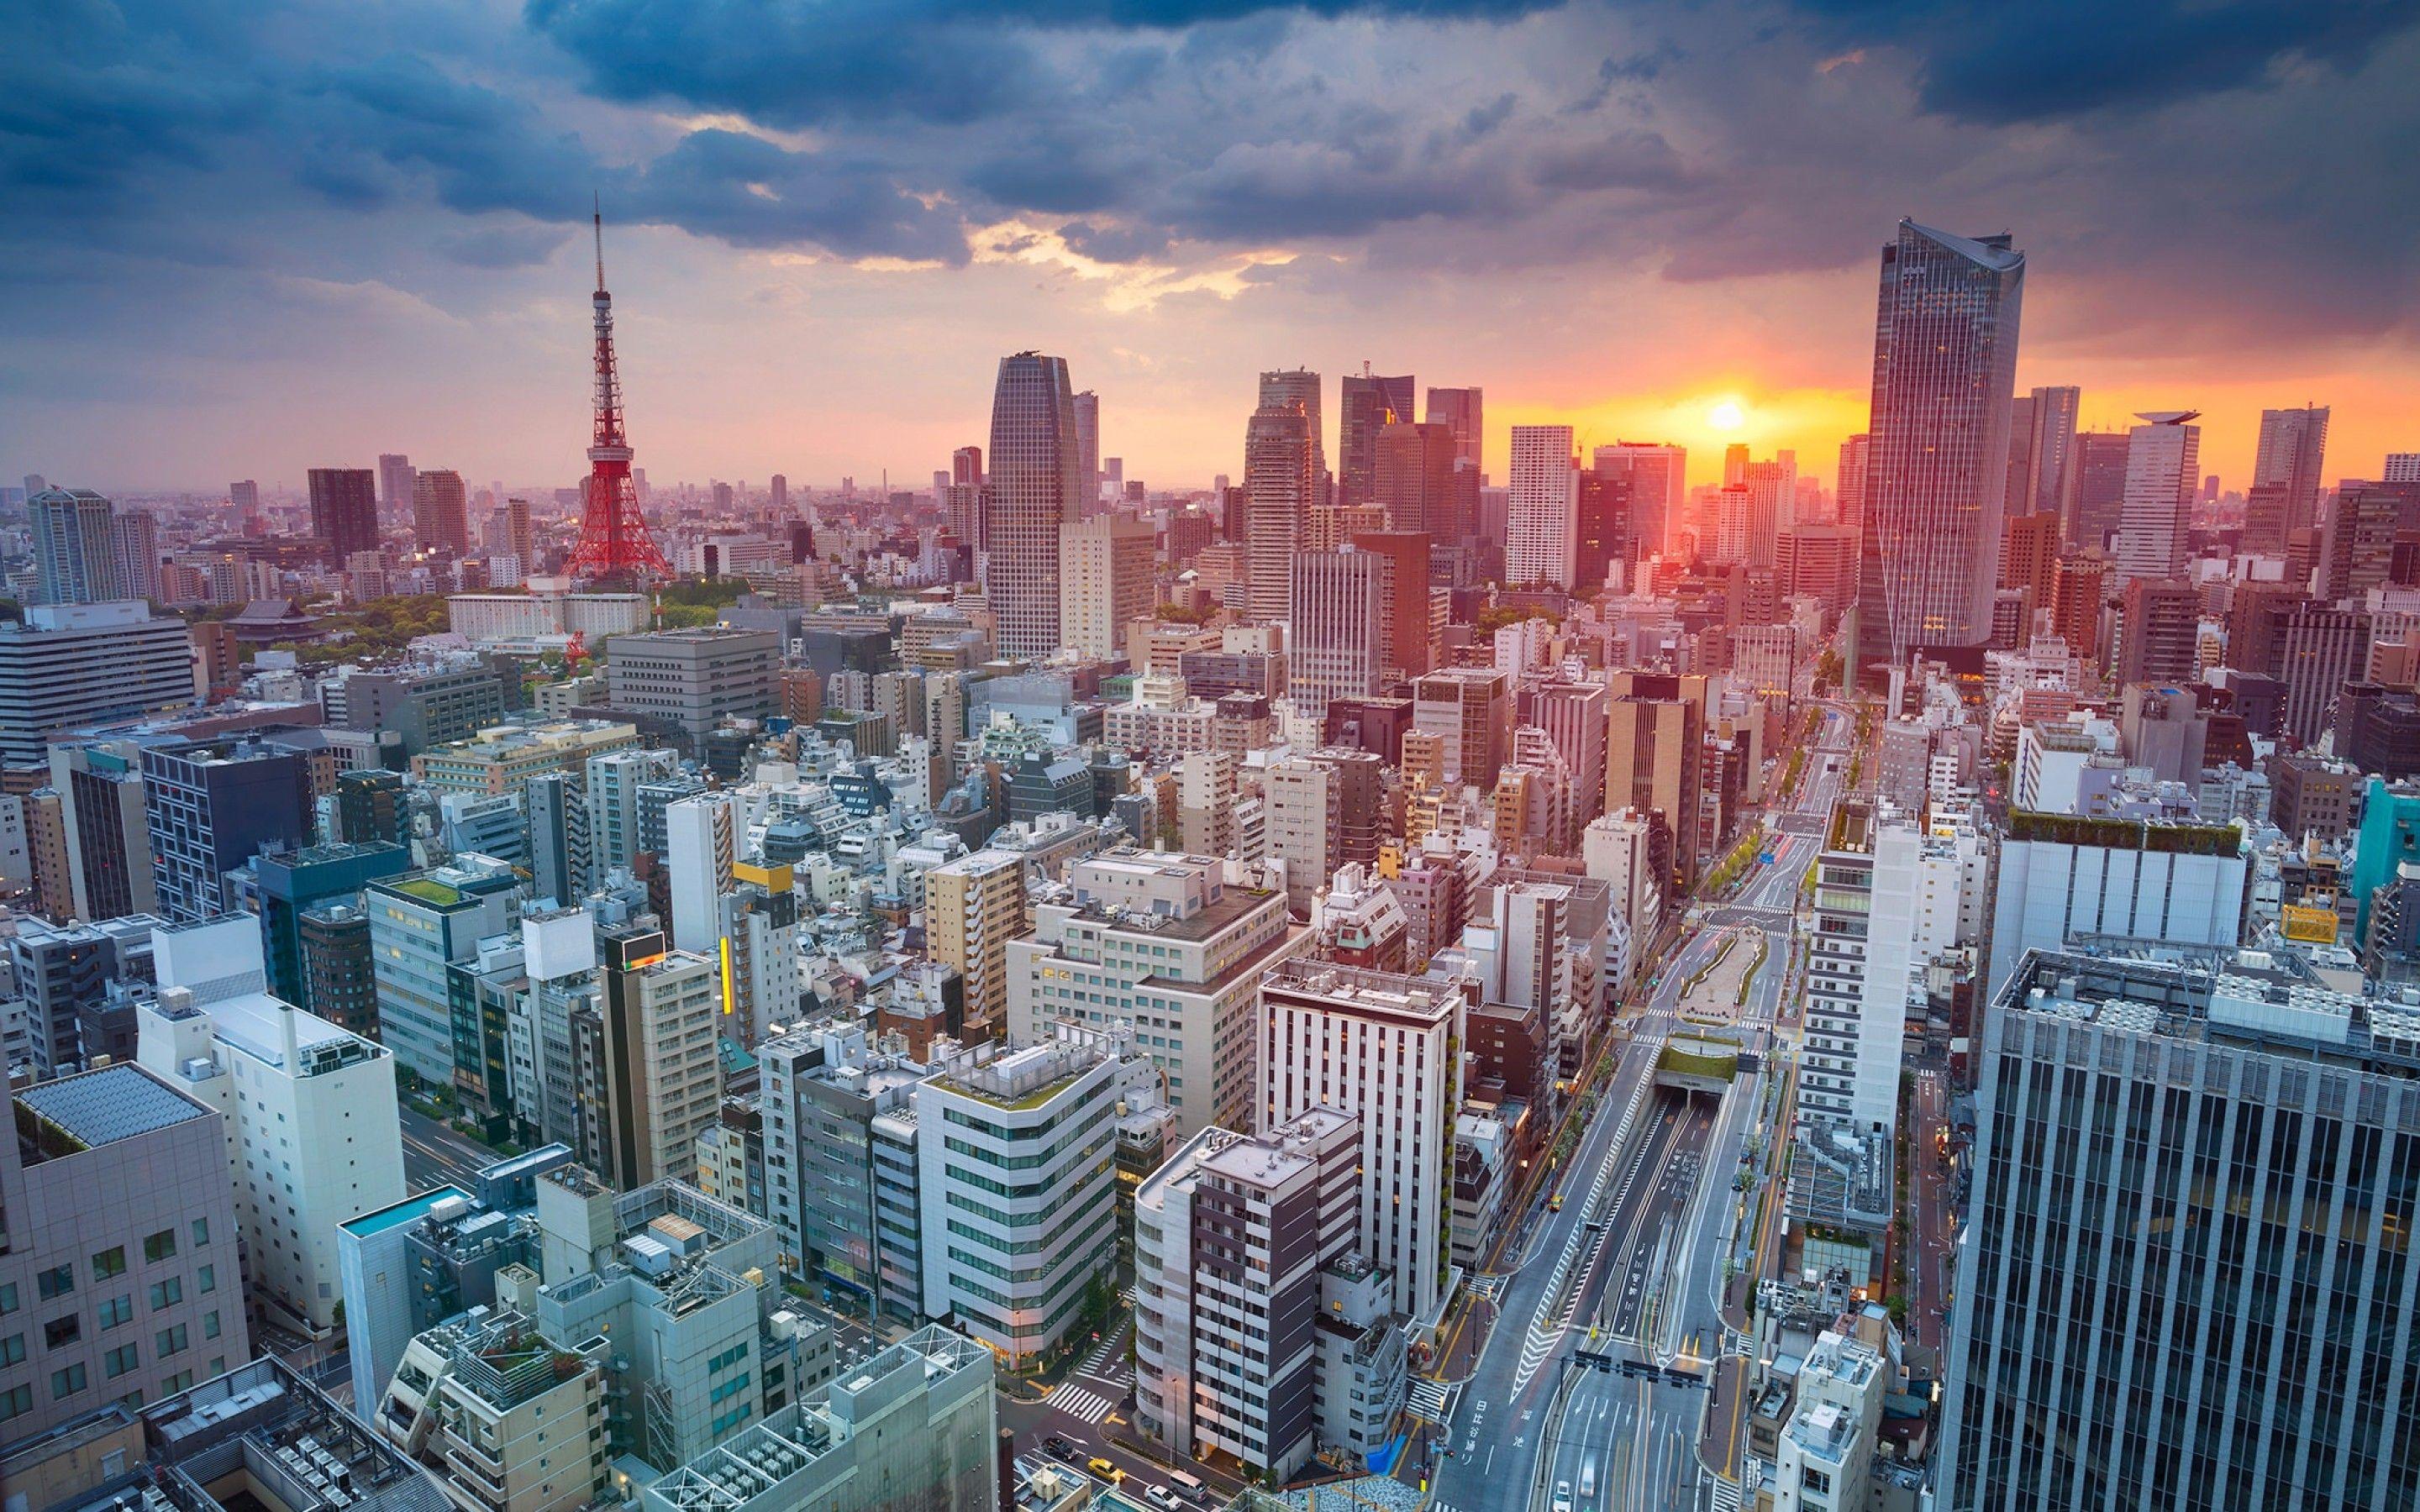 Tokyo Sunset Wallpapers - Top Free Tokyo Sunset Backgrounds ...